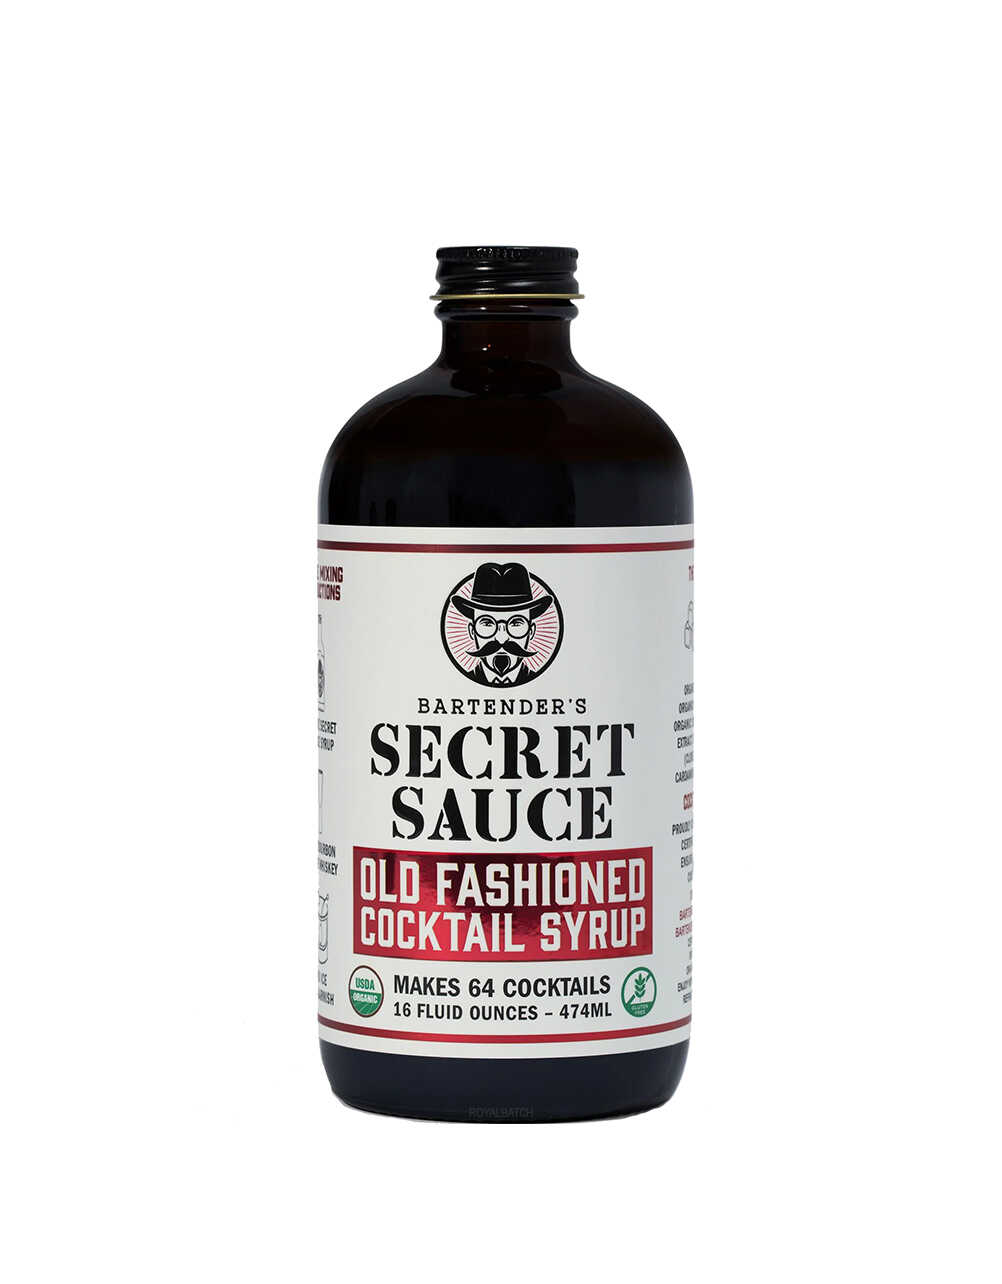 Bartenders Secret Sauce Old Fashioned Cocktail Syrup 237ml